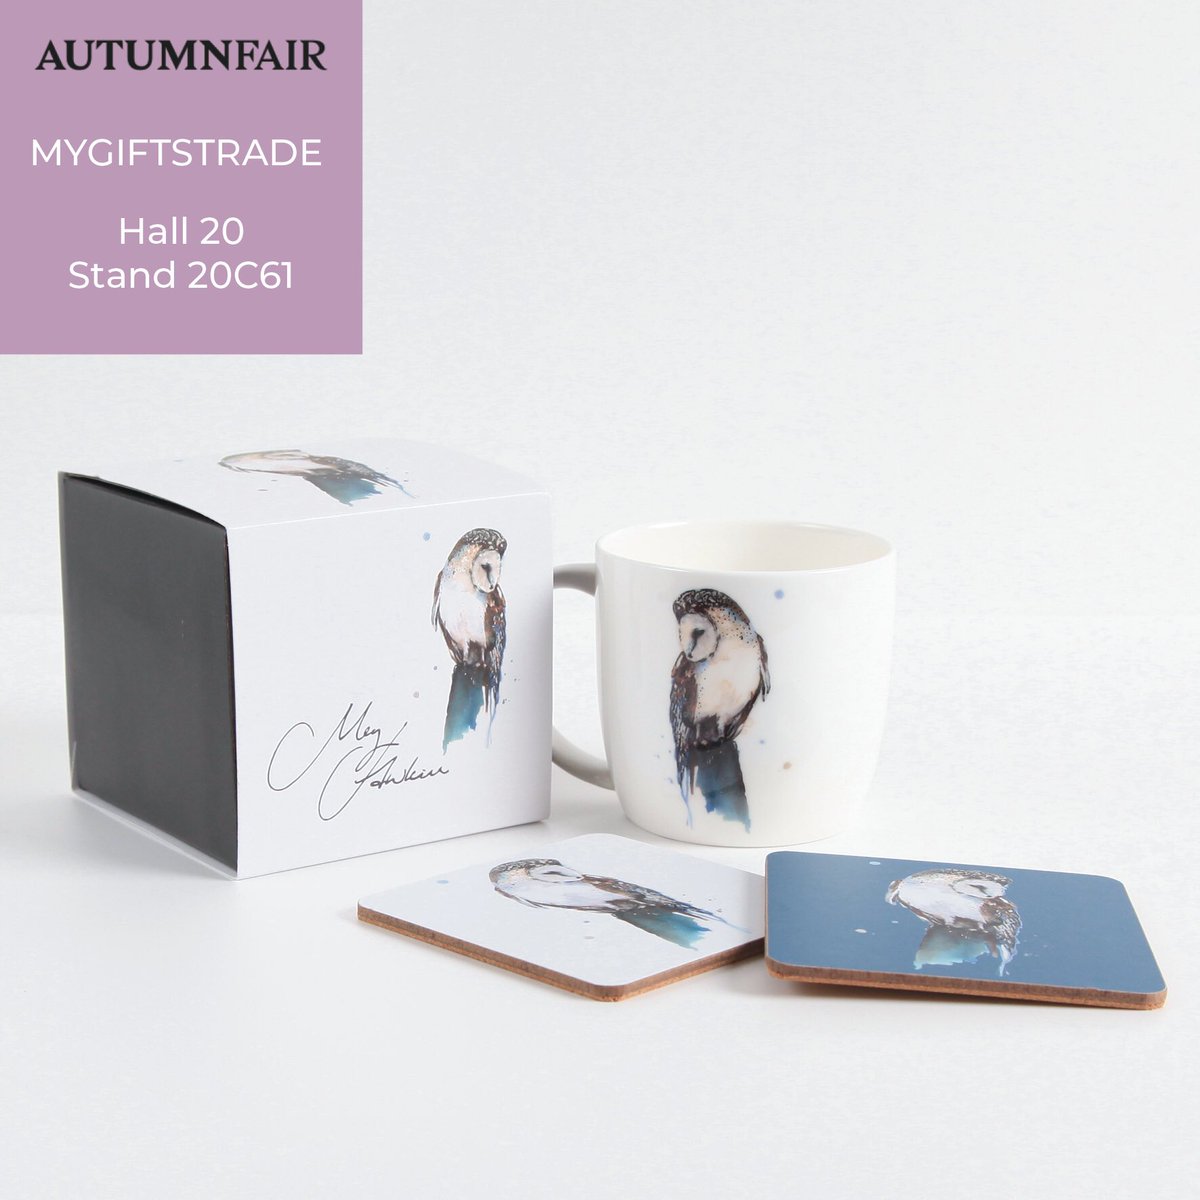 We’re delighted to share the beautiful @mygiftstrade products which be on show at @springautumnfair this year.The whole collection looks stunning together.
Find them Hall20 Stand C61
#aprons #kitchen #mug #quality  #tradeshow #meghawkins #designer #artist  #licensedartist